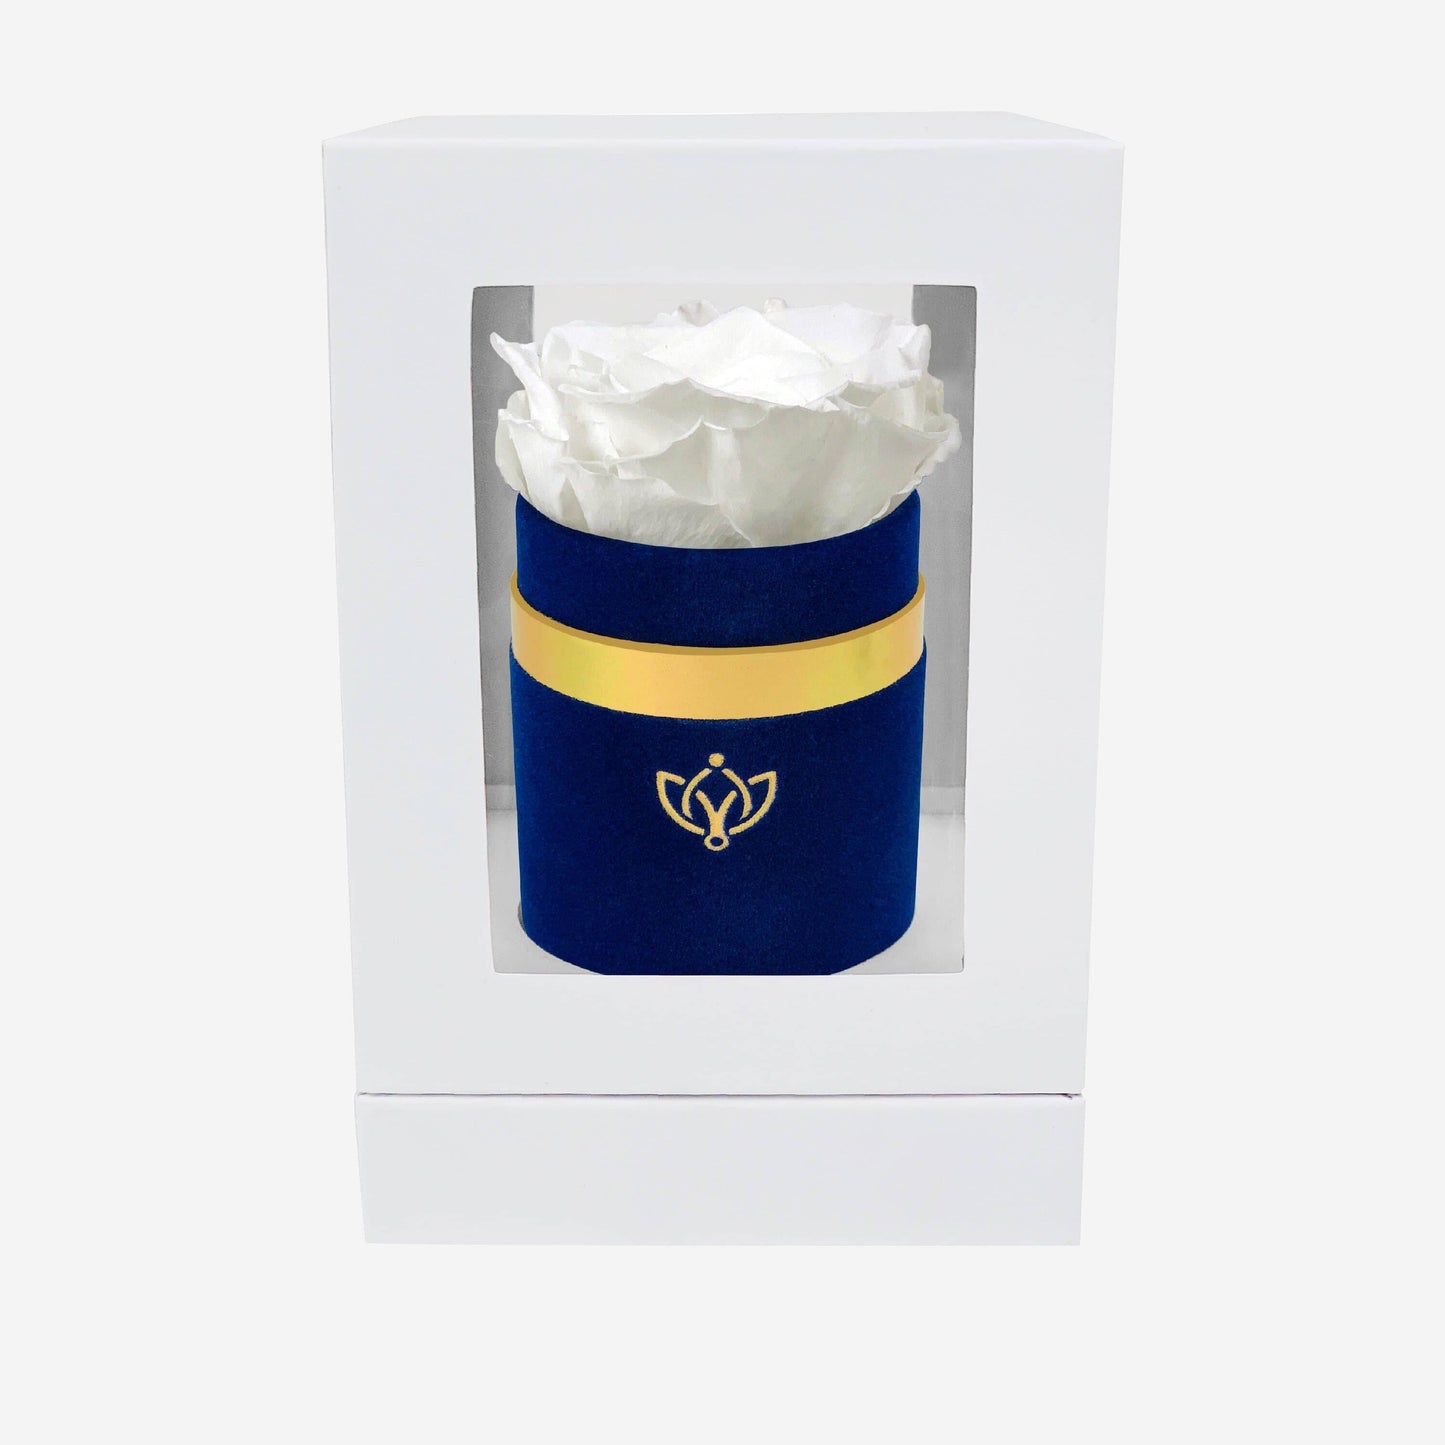 Single Royal Blue Suede Box | White Rose - The Million Roses